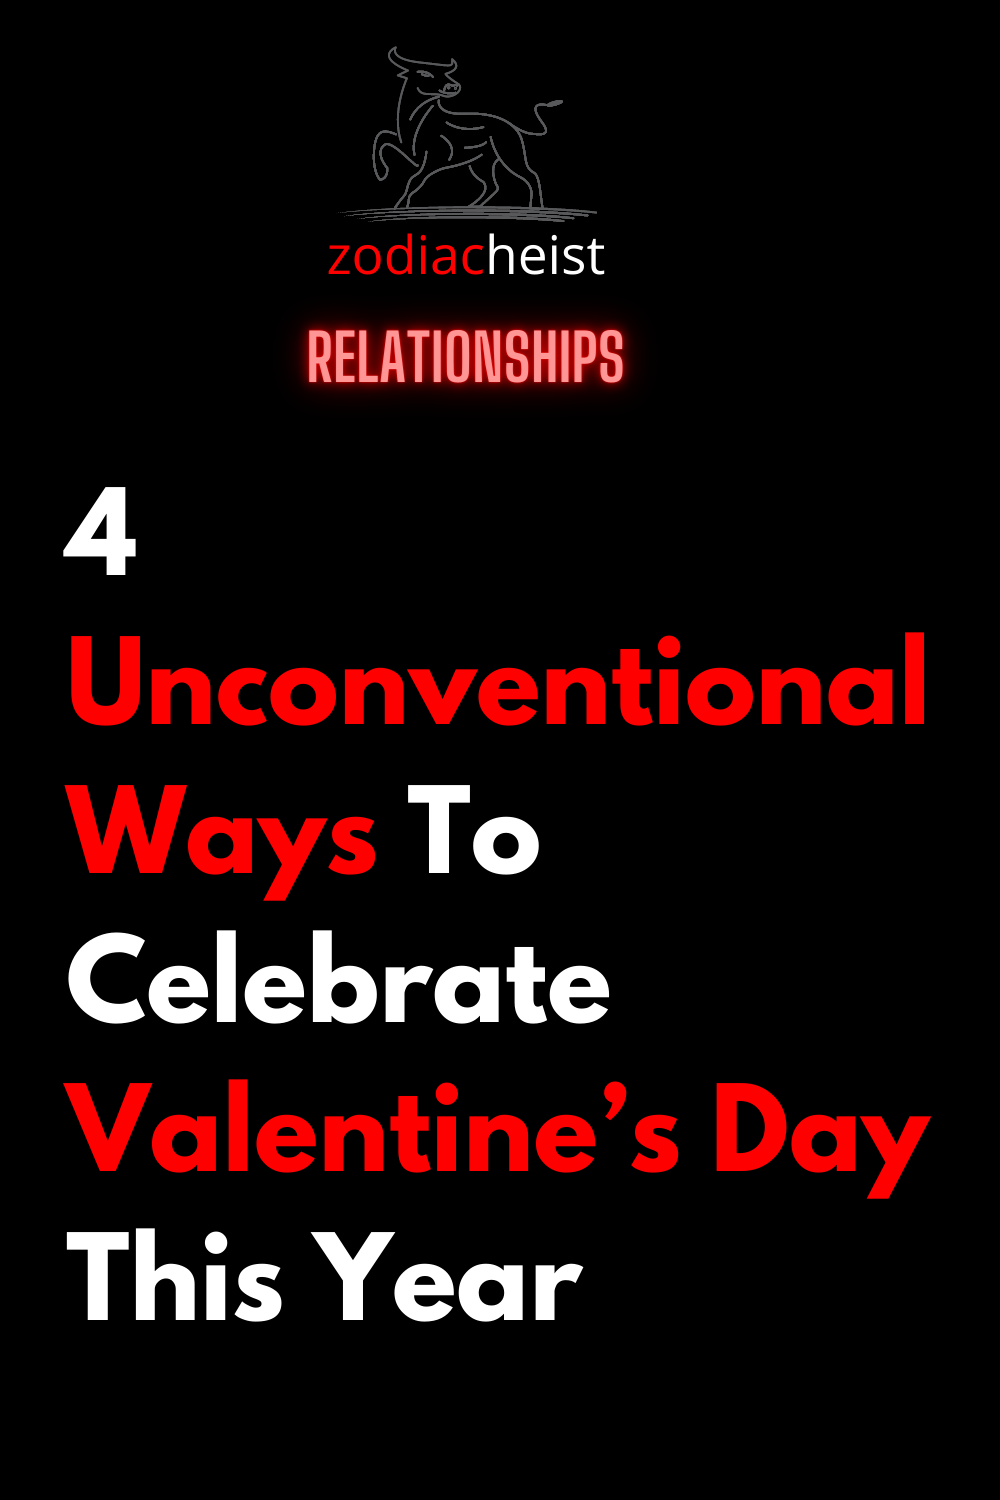 4 Unconventional Ways To Celebrate Valentine’s Day This Year